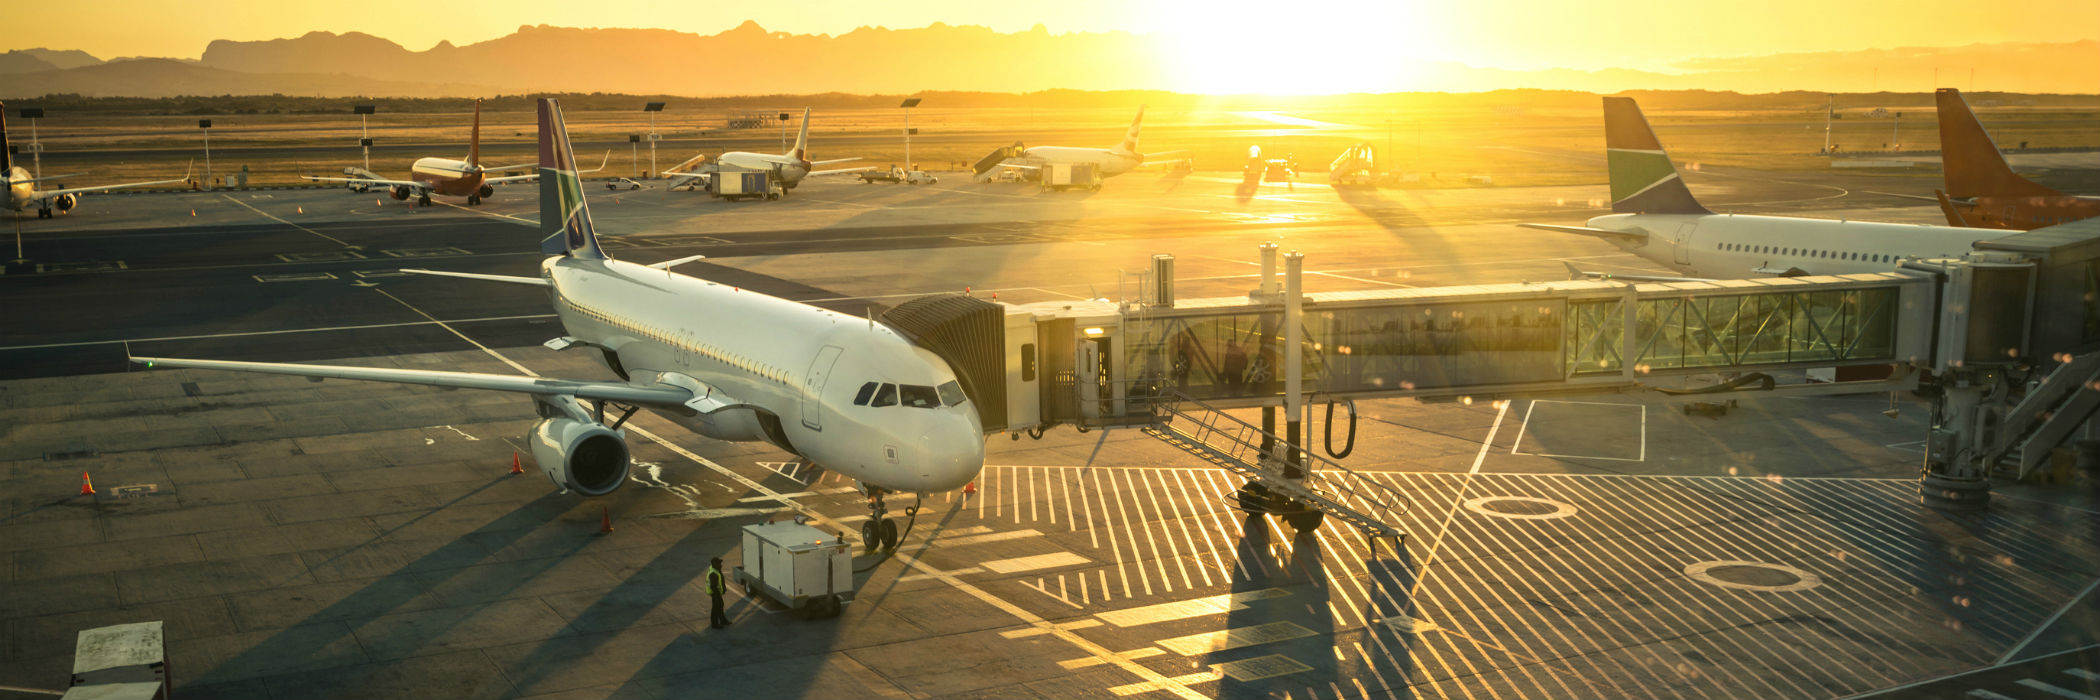 Airplanes and jet bridge at sunset